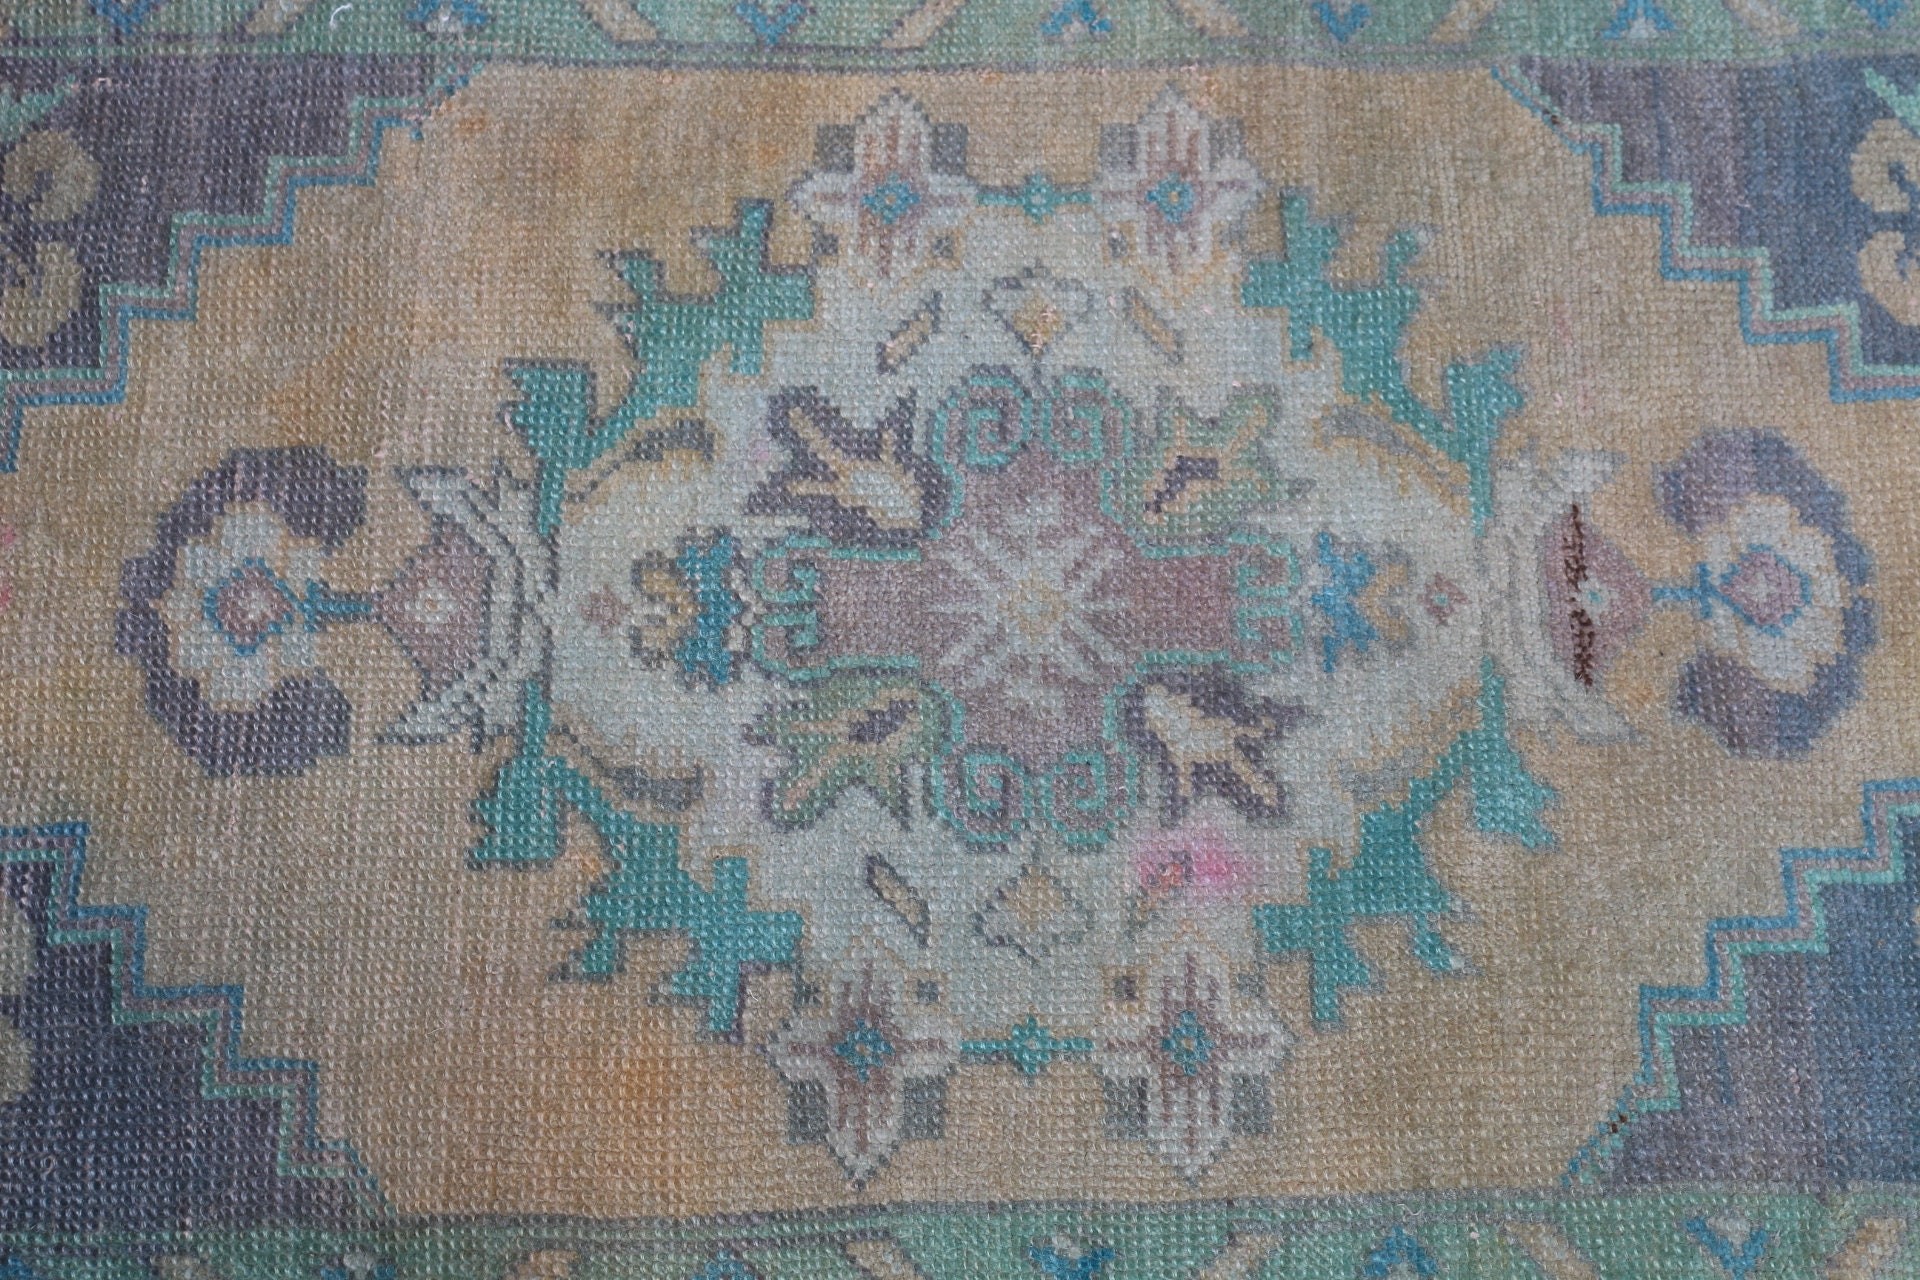 Turkish Rugs, 1.6x3.1 ft Small Rug, Bath Rug, Antique Rugs, Moroccan Rugs, Vintage Rug, Kitchen Rug, Green Antique Rug, Rugs for Kitchen